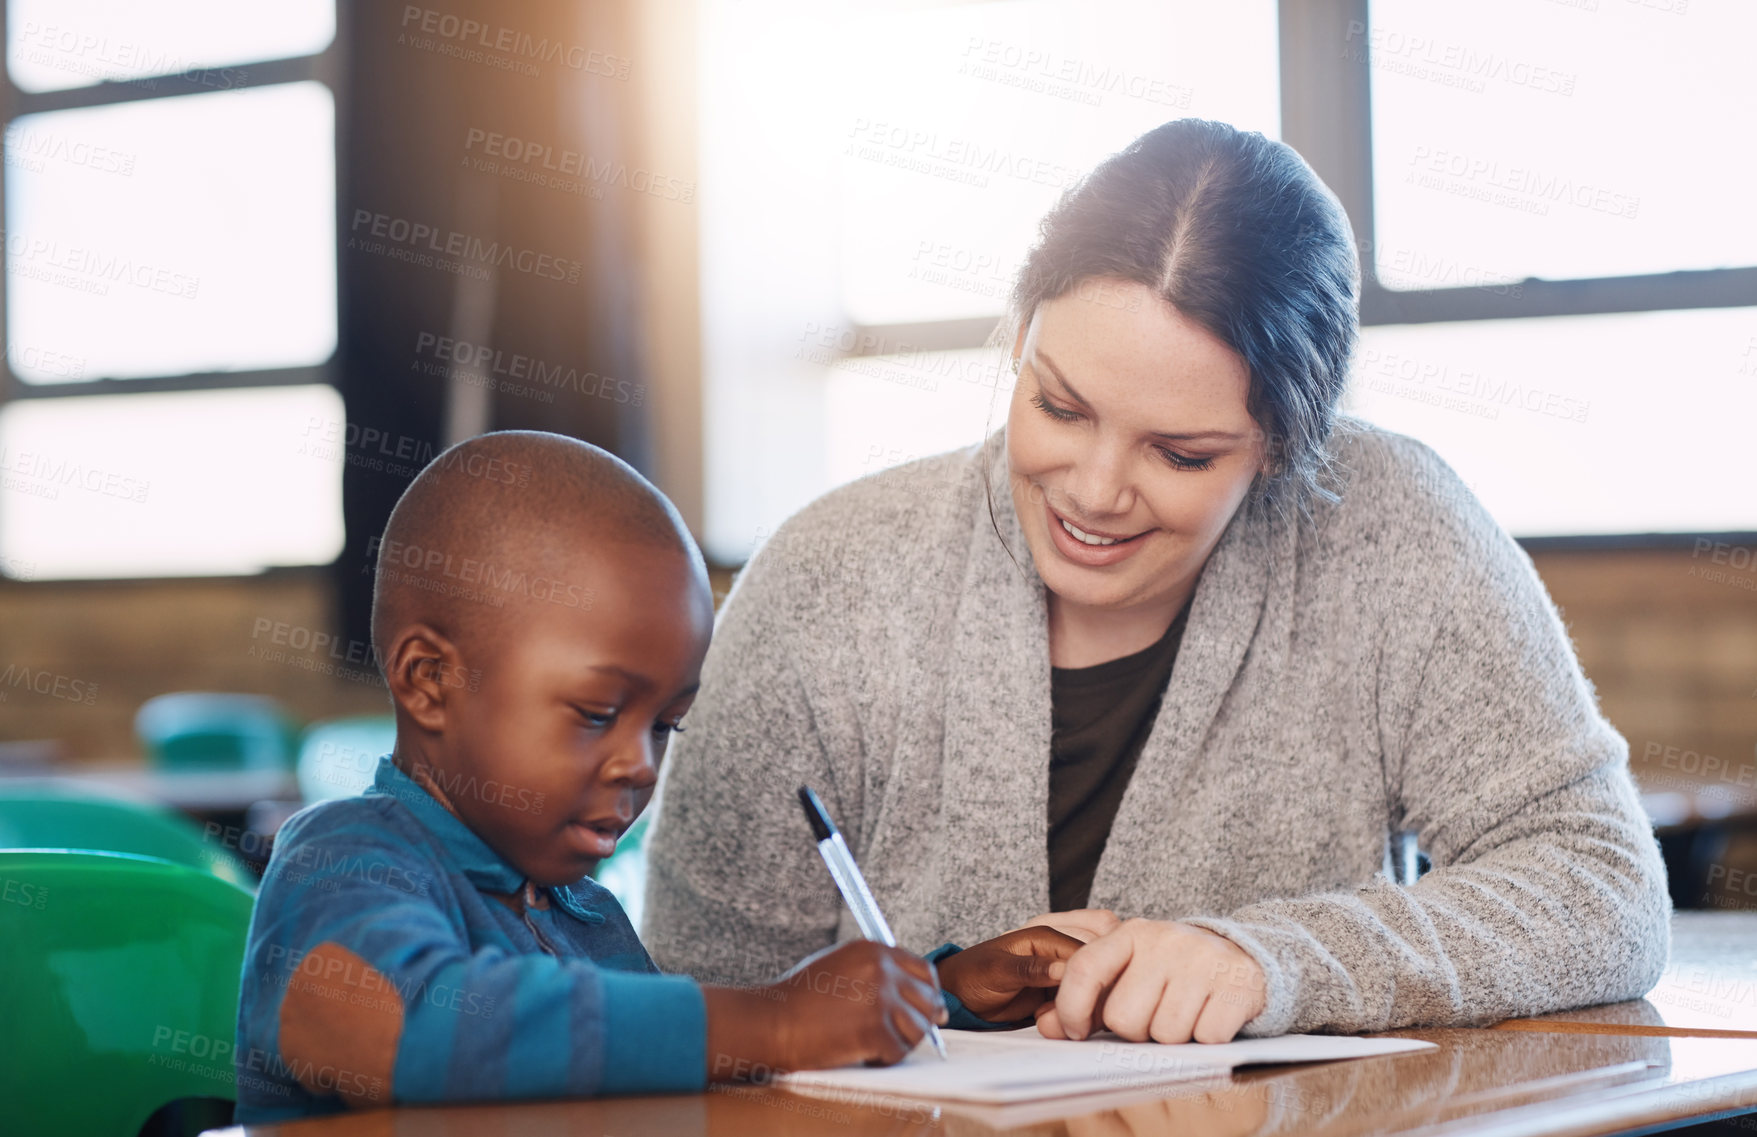 Buy stock photo Cropped shot of an elementary school boy and his teacher doing school work together in the classroom